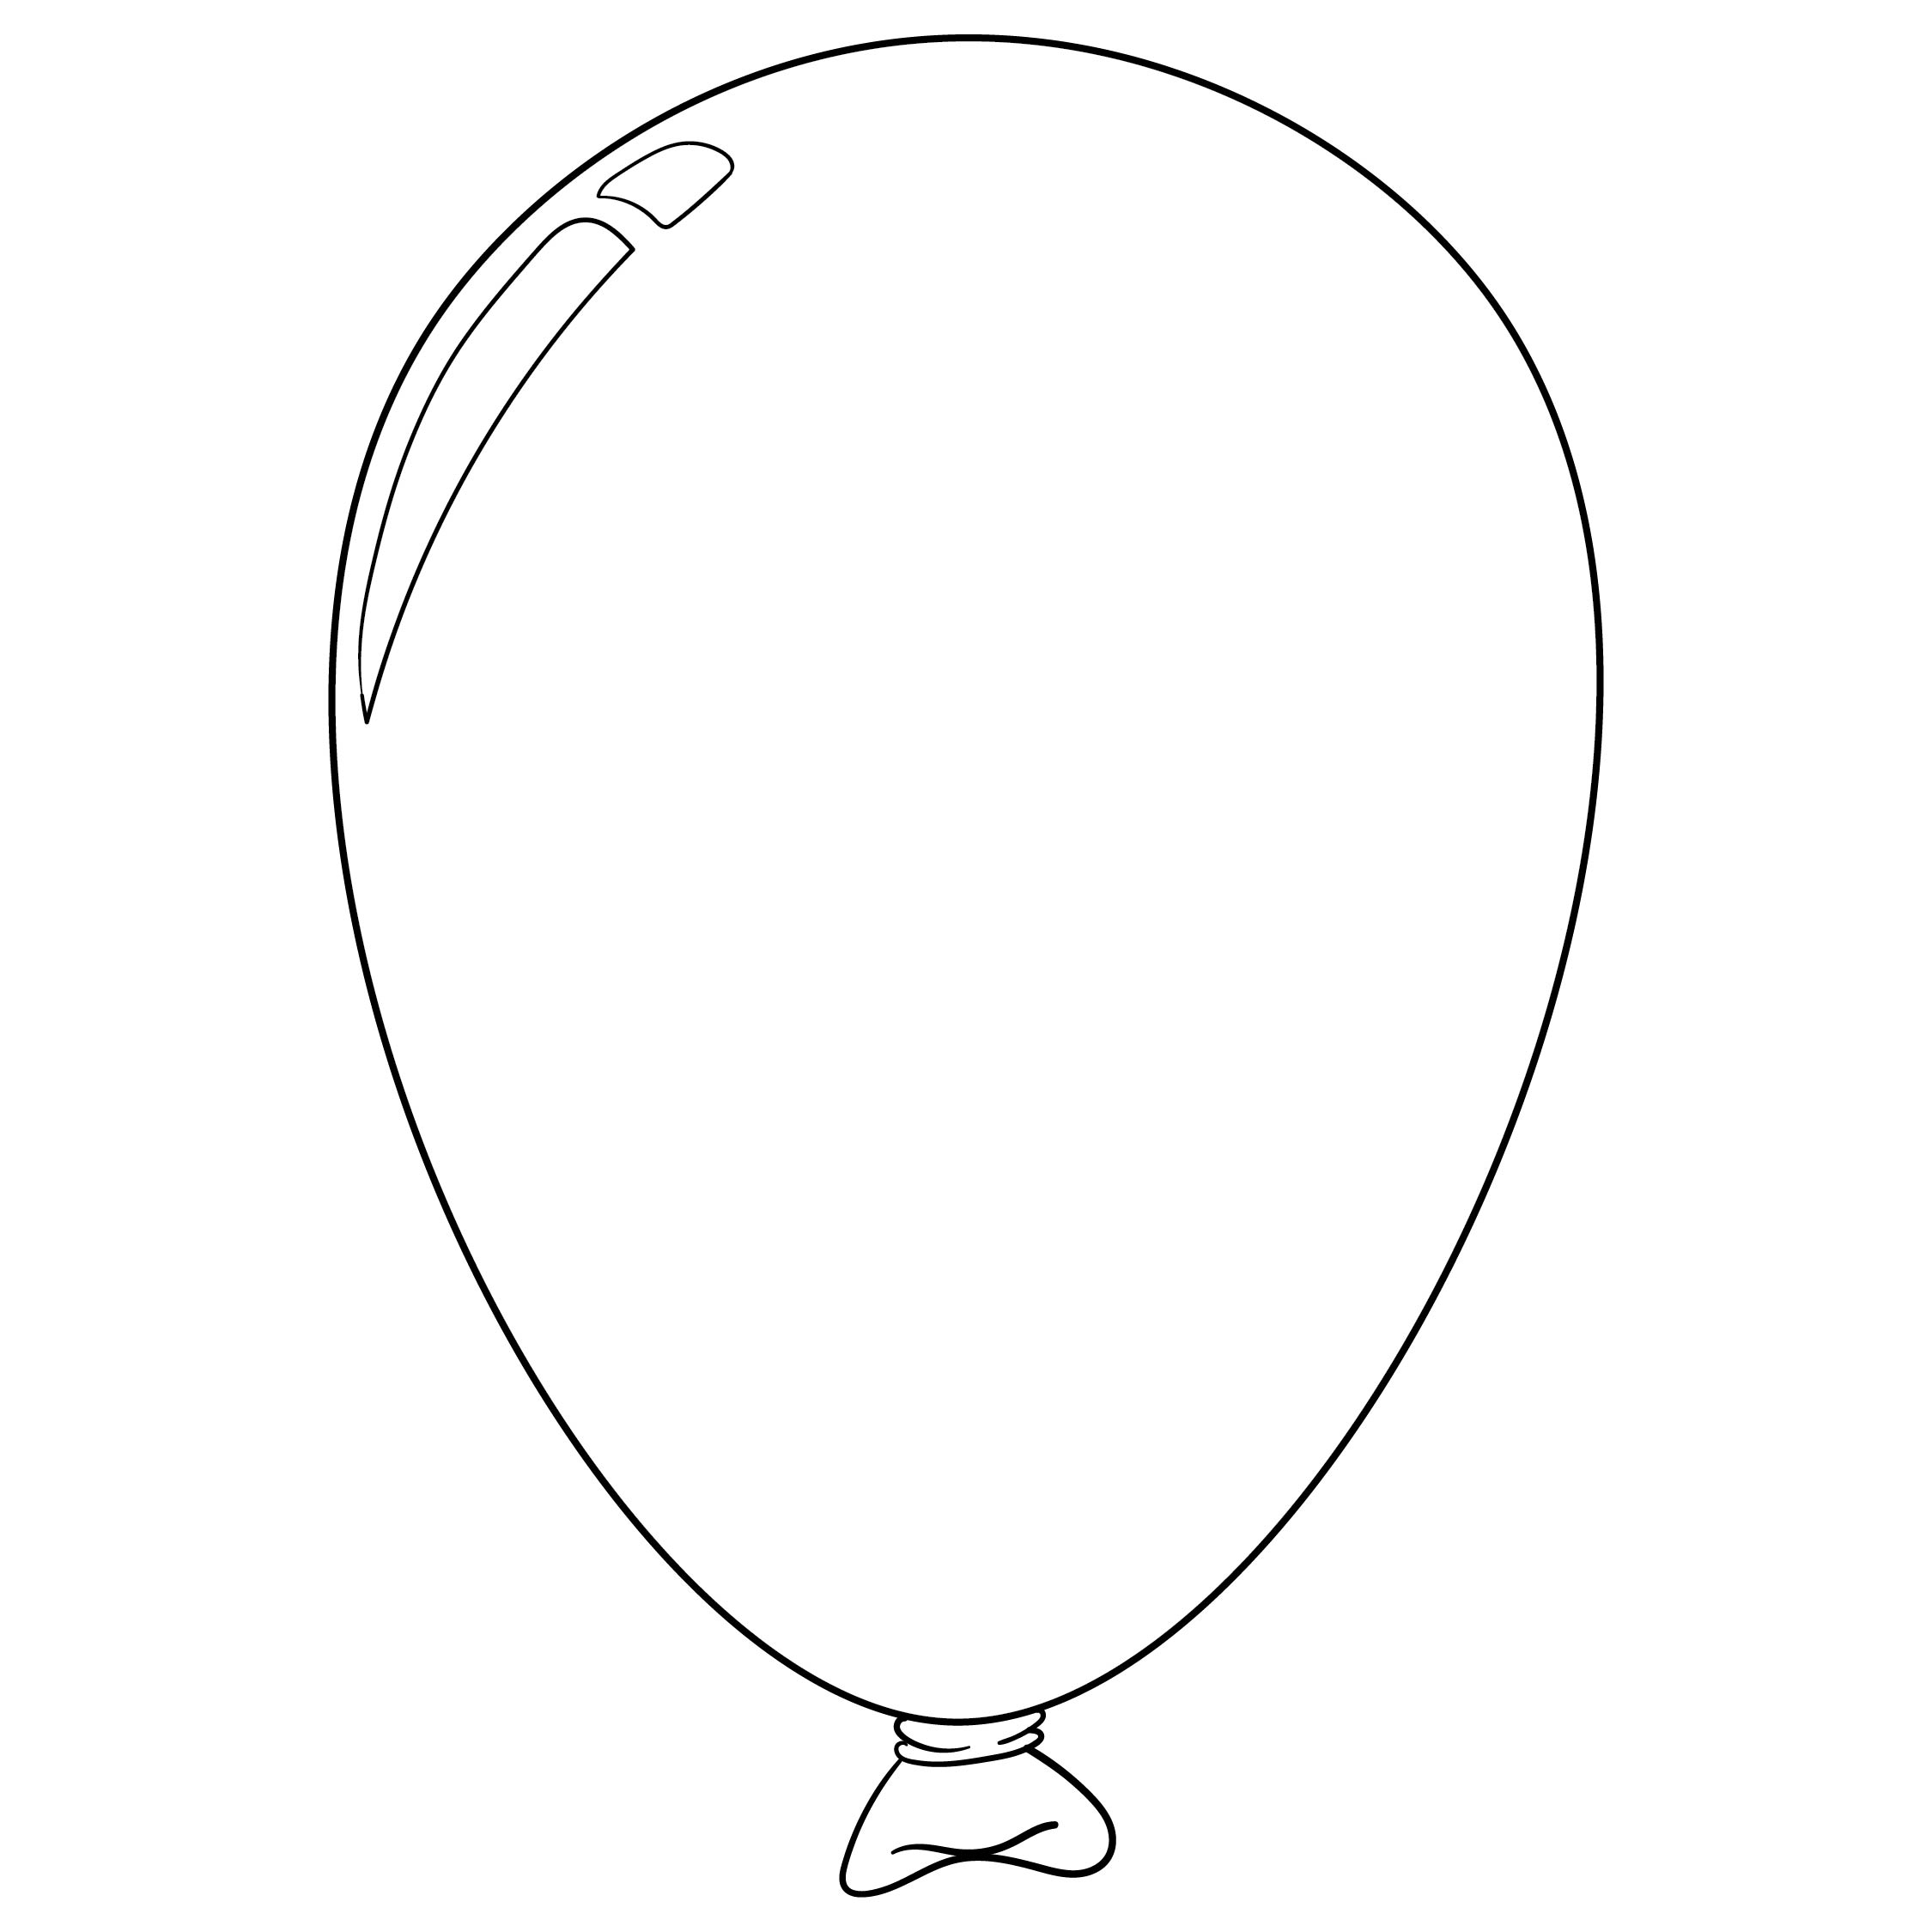 7-best-images-of-balloon-outline-printable-balloon-cut-out-template